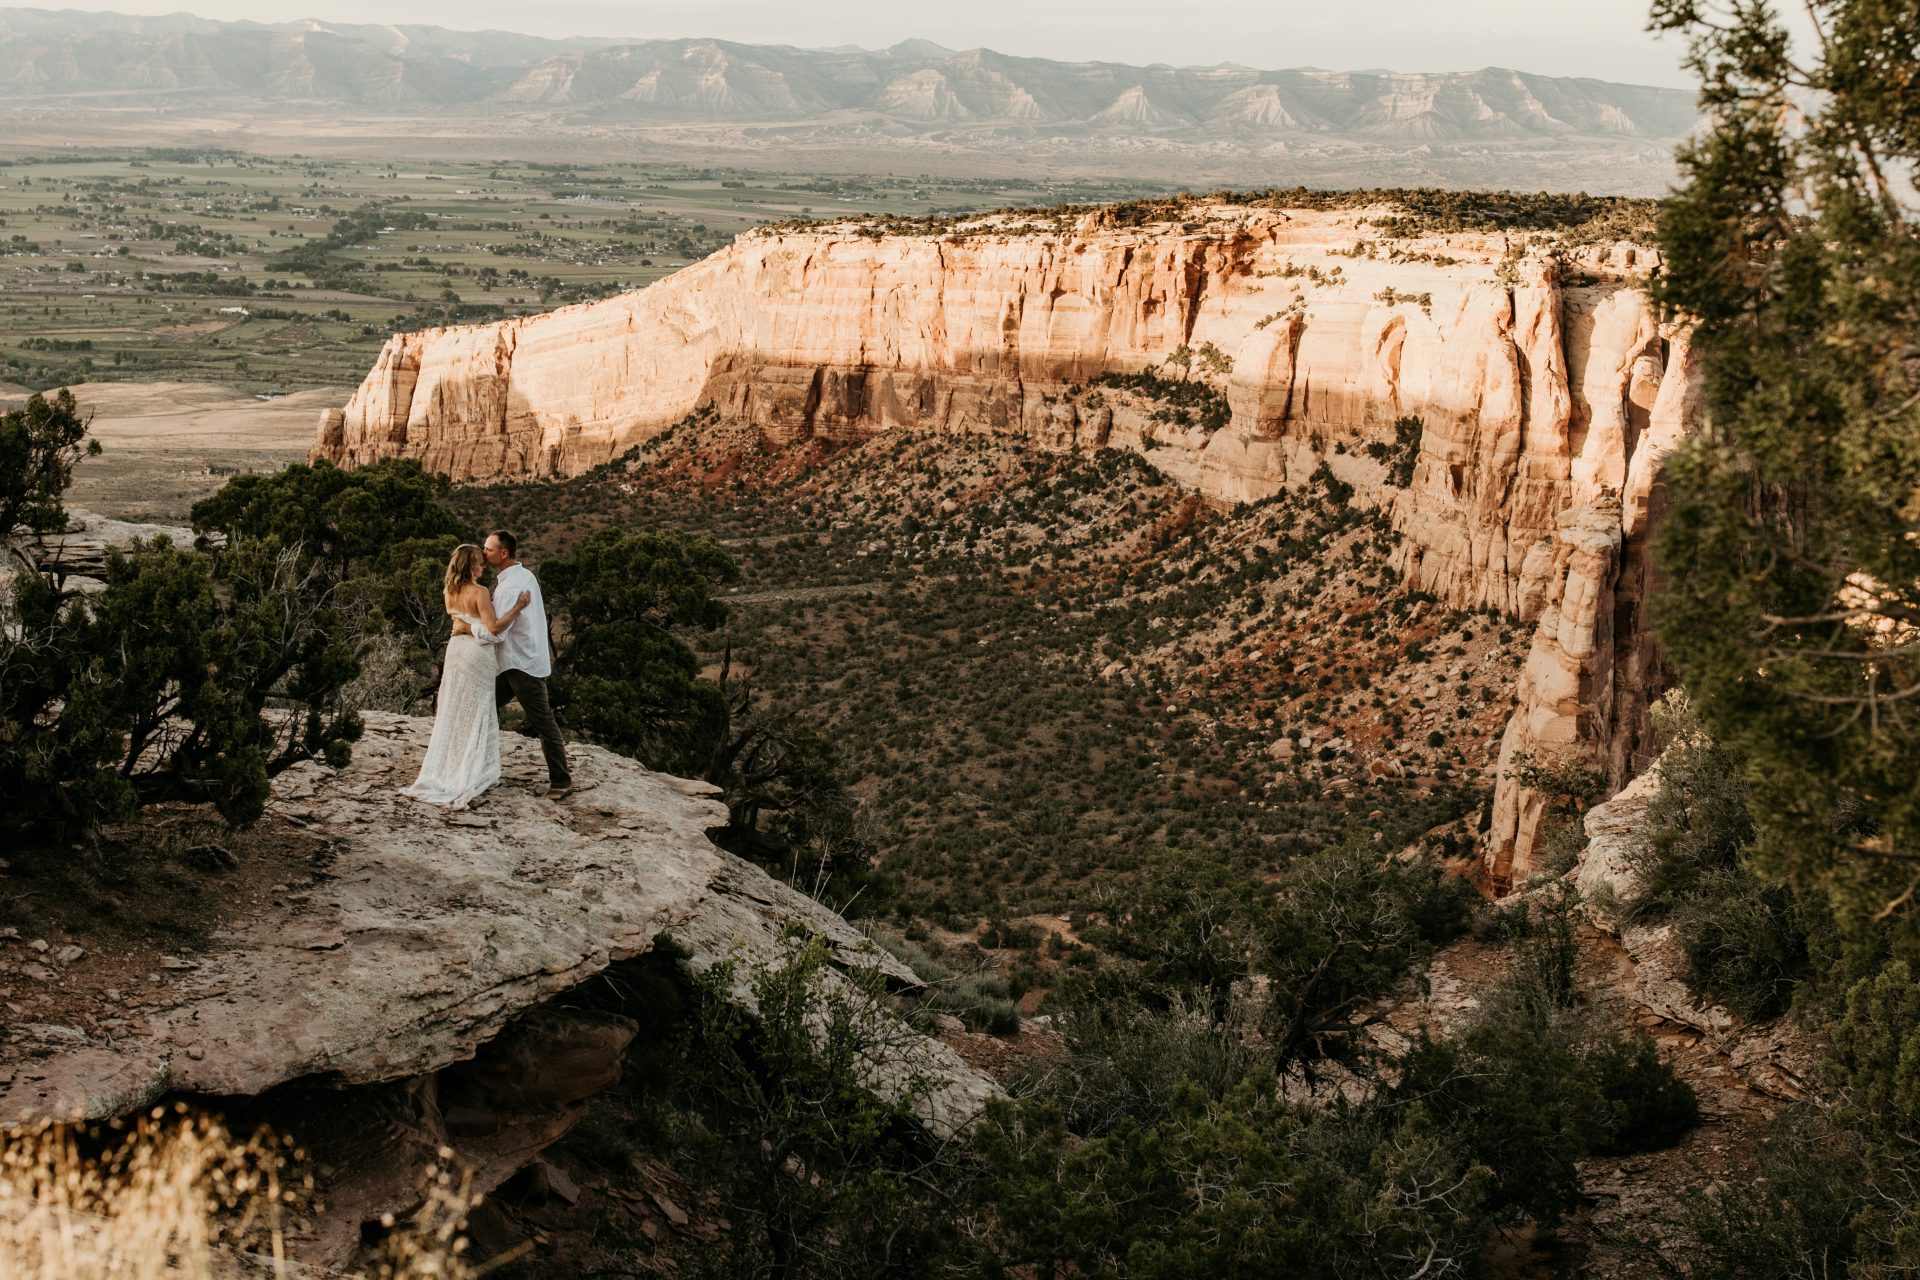 A bride and groom standing on the edge of a cliff kissing at sunset with the mountainous landscape behind them